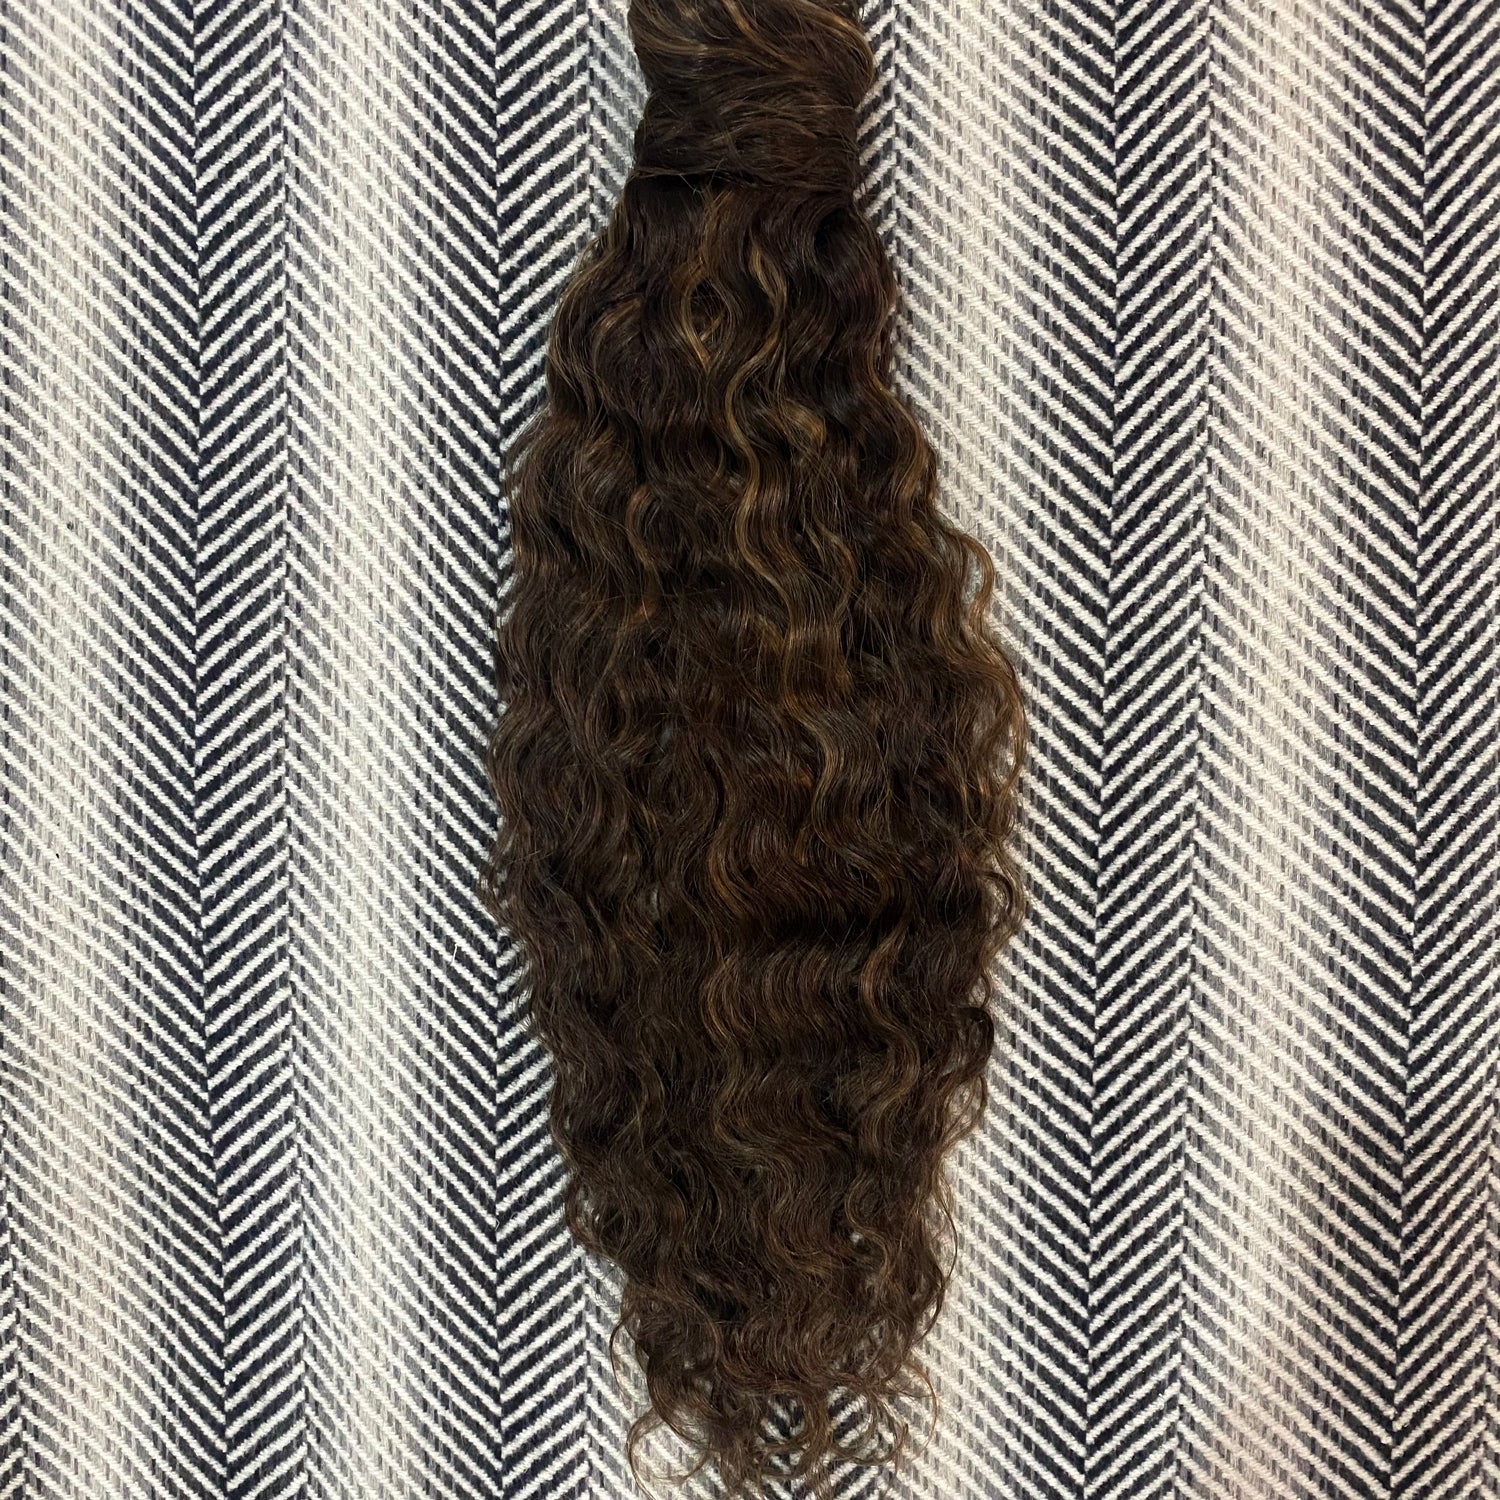 Curly Ponytail Human Hair Extensions #2/10 Dark Brown and Caramel Mix